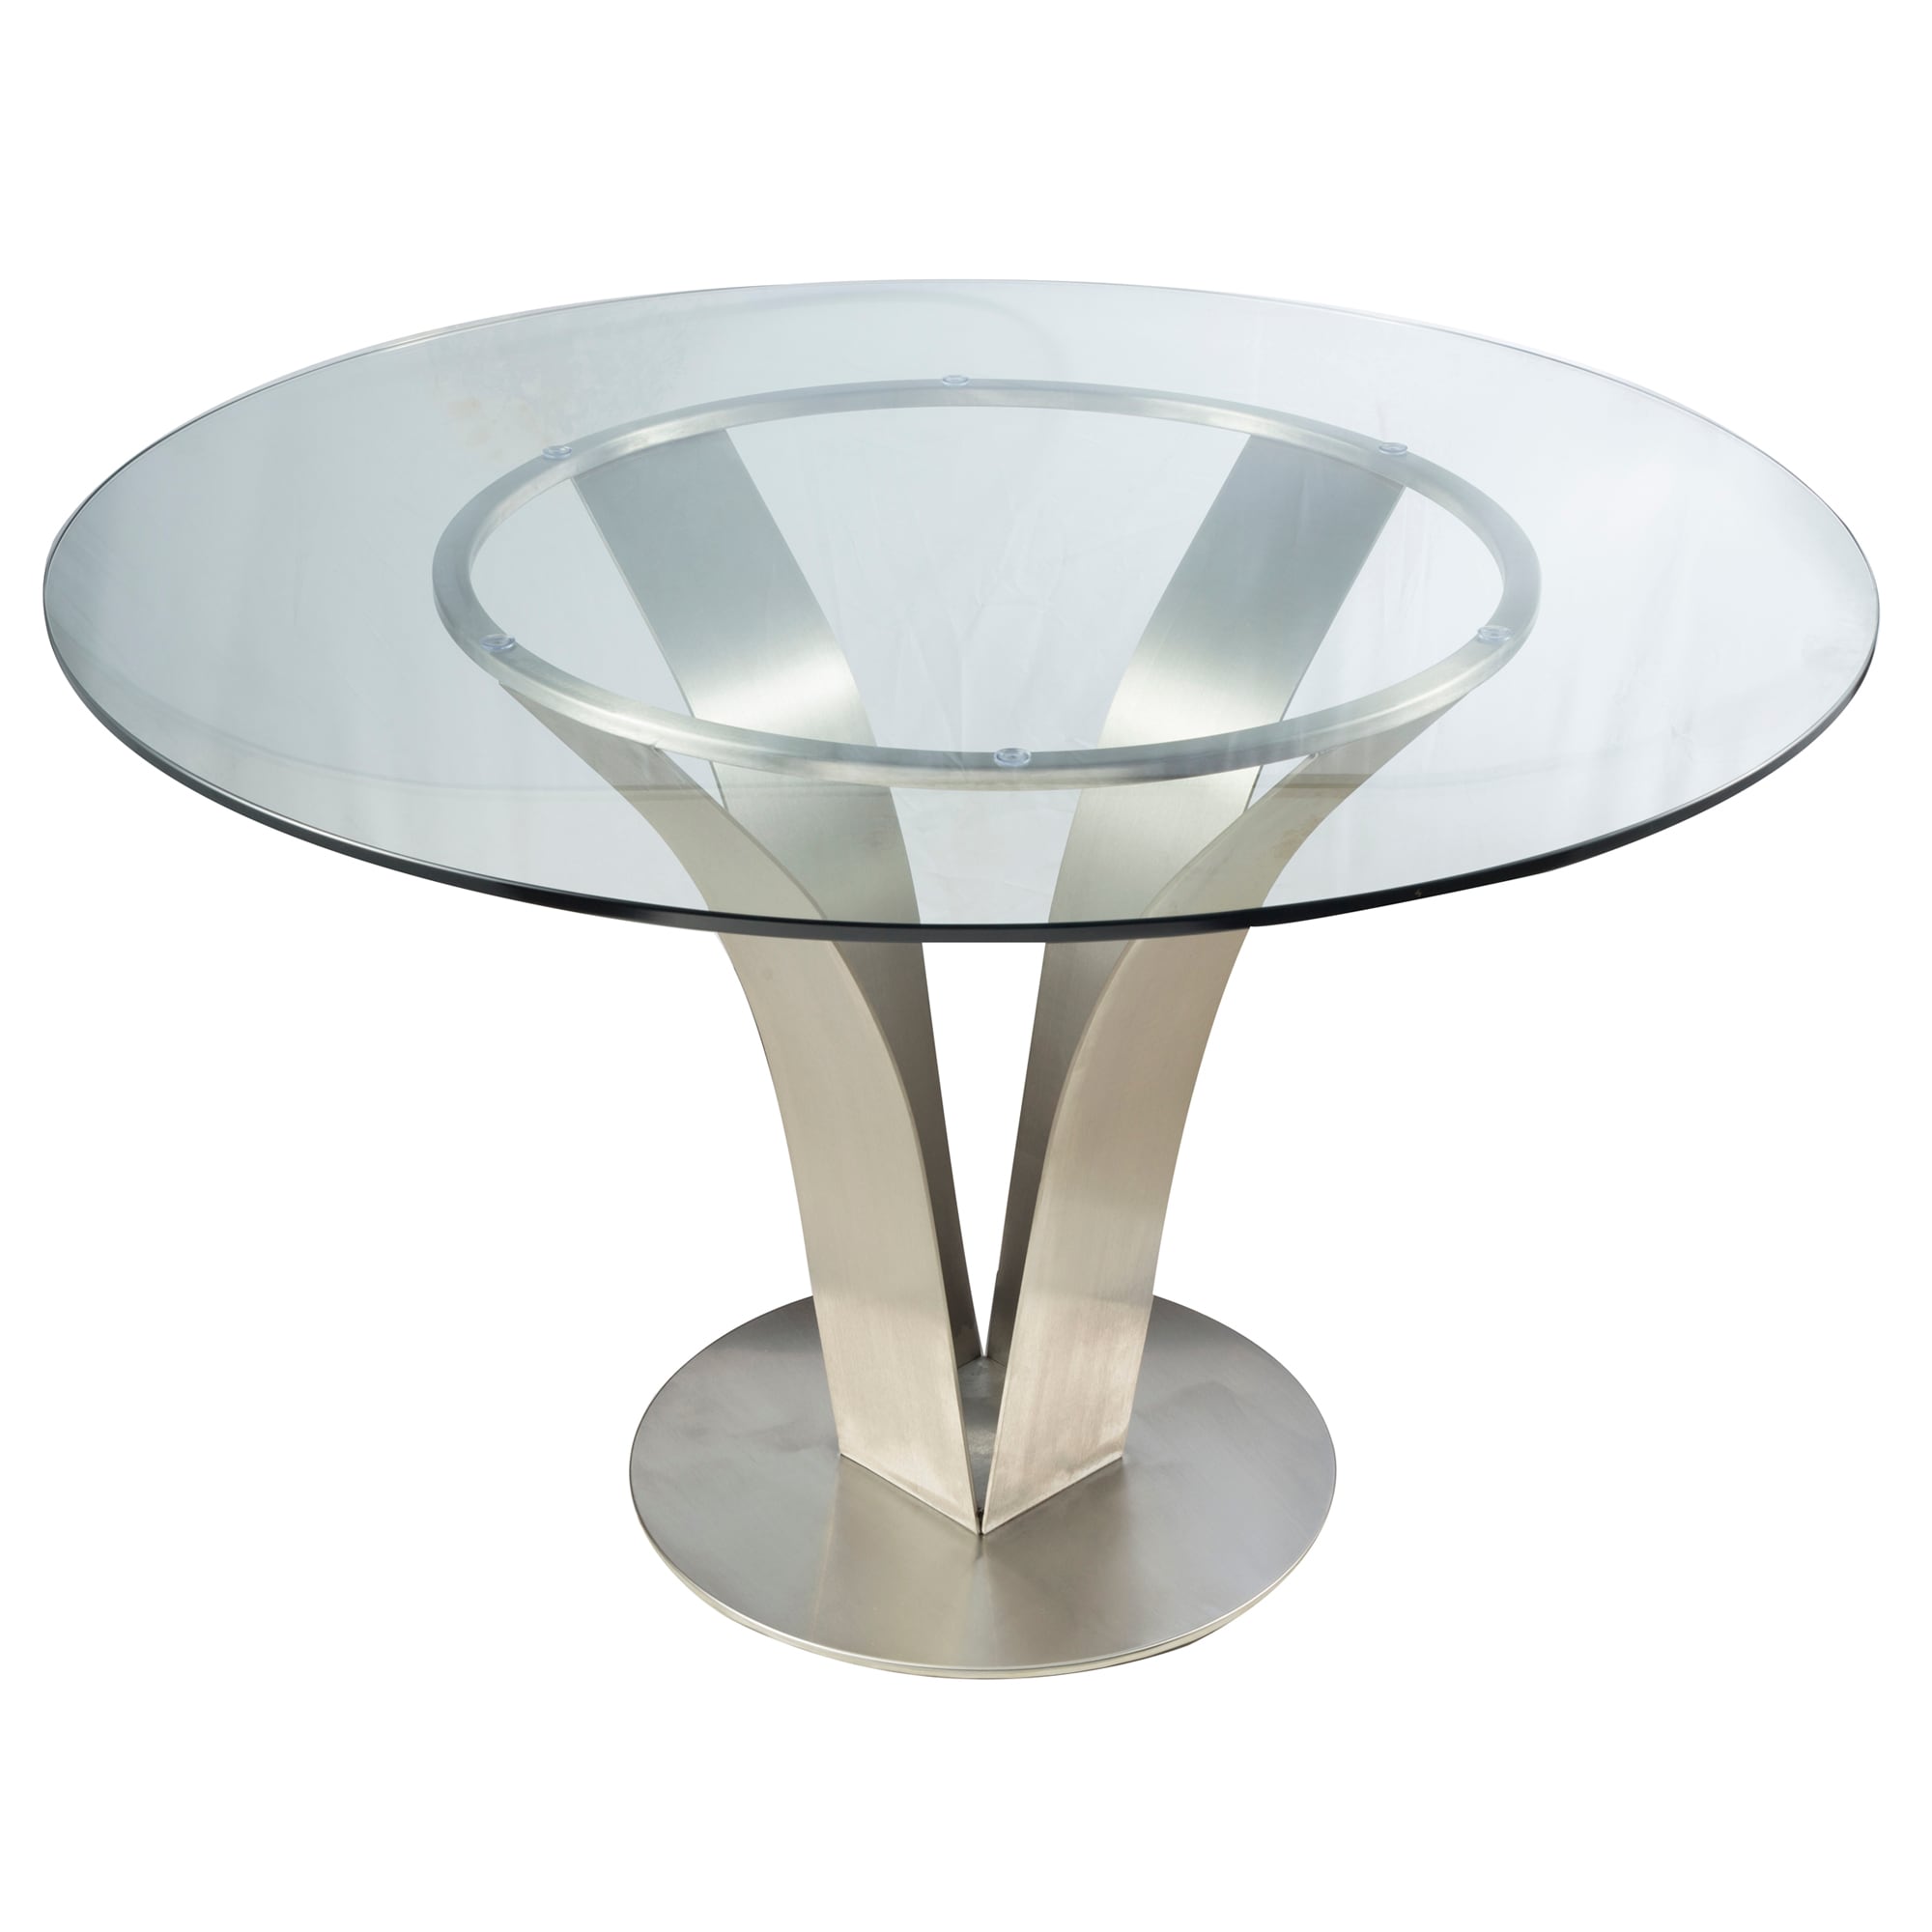 Modern Dining Table Round Glass Coffee Table Small Kitchen Table